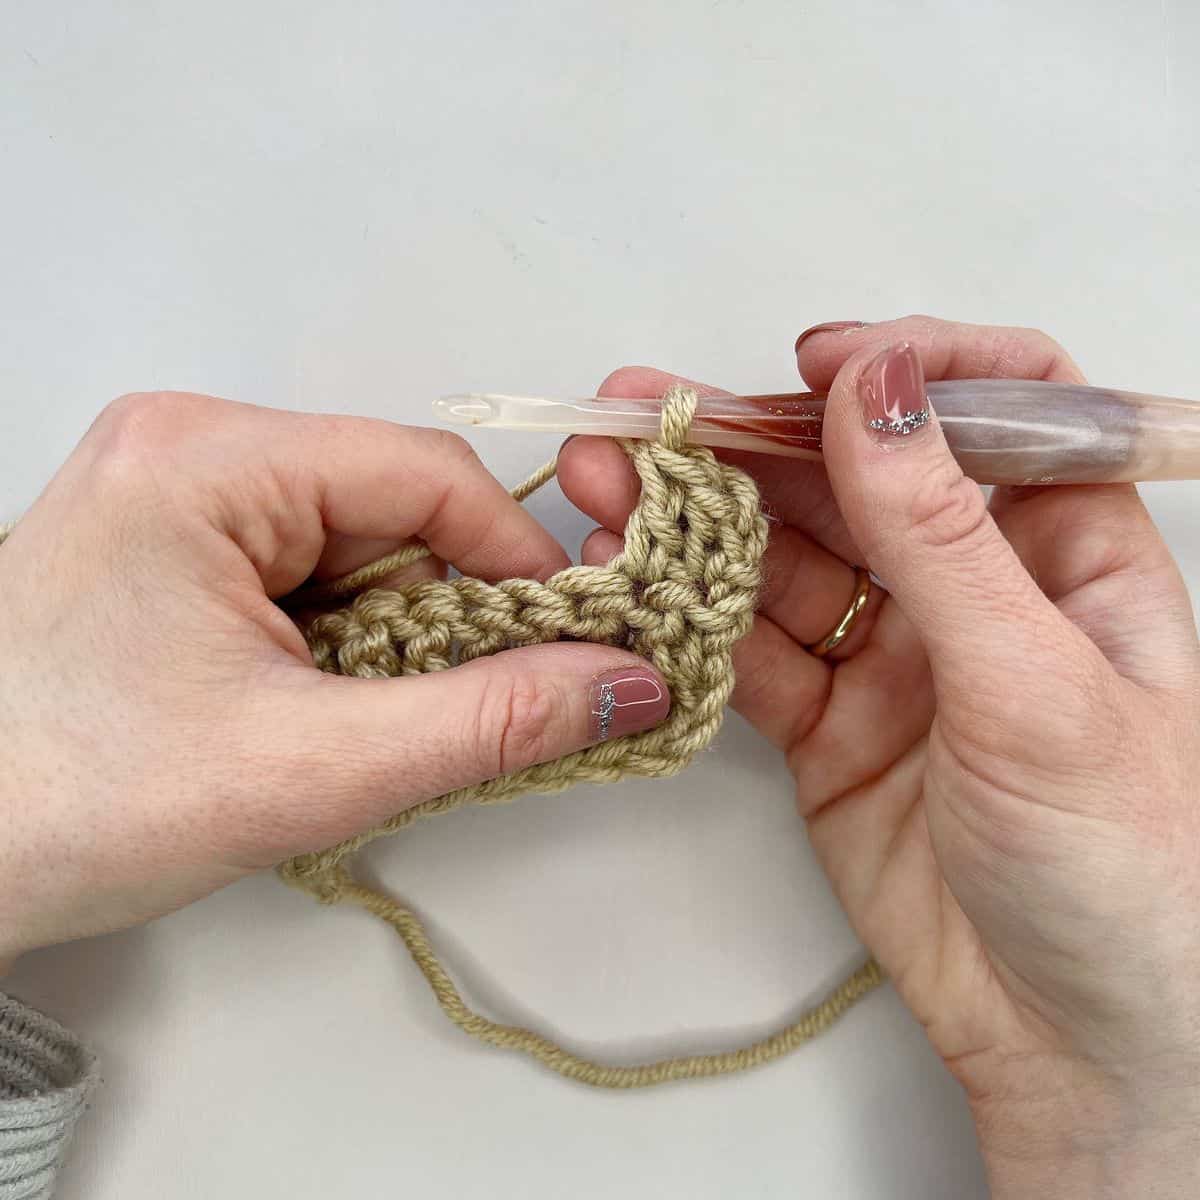 Showing next double crochet stitch after a stacked crochet stitch.